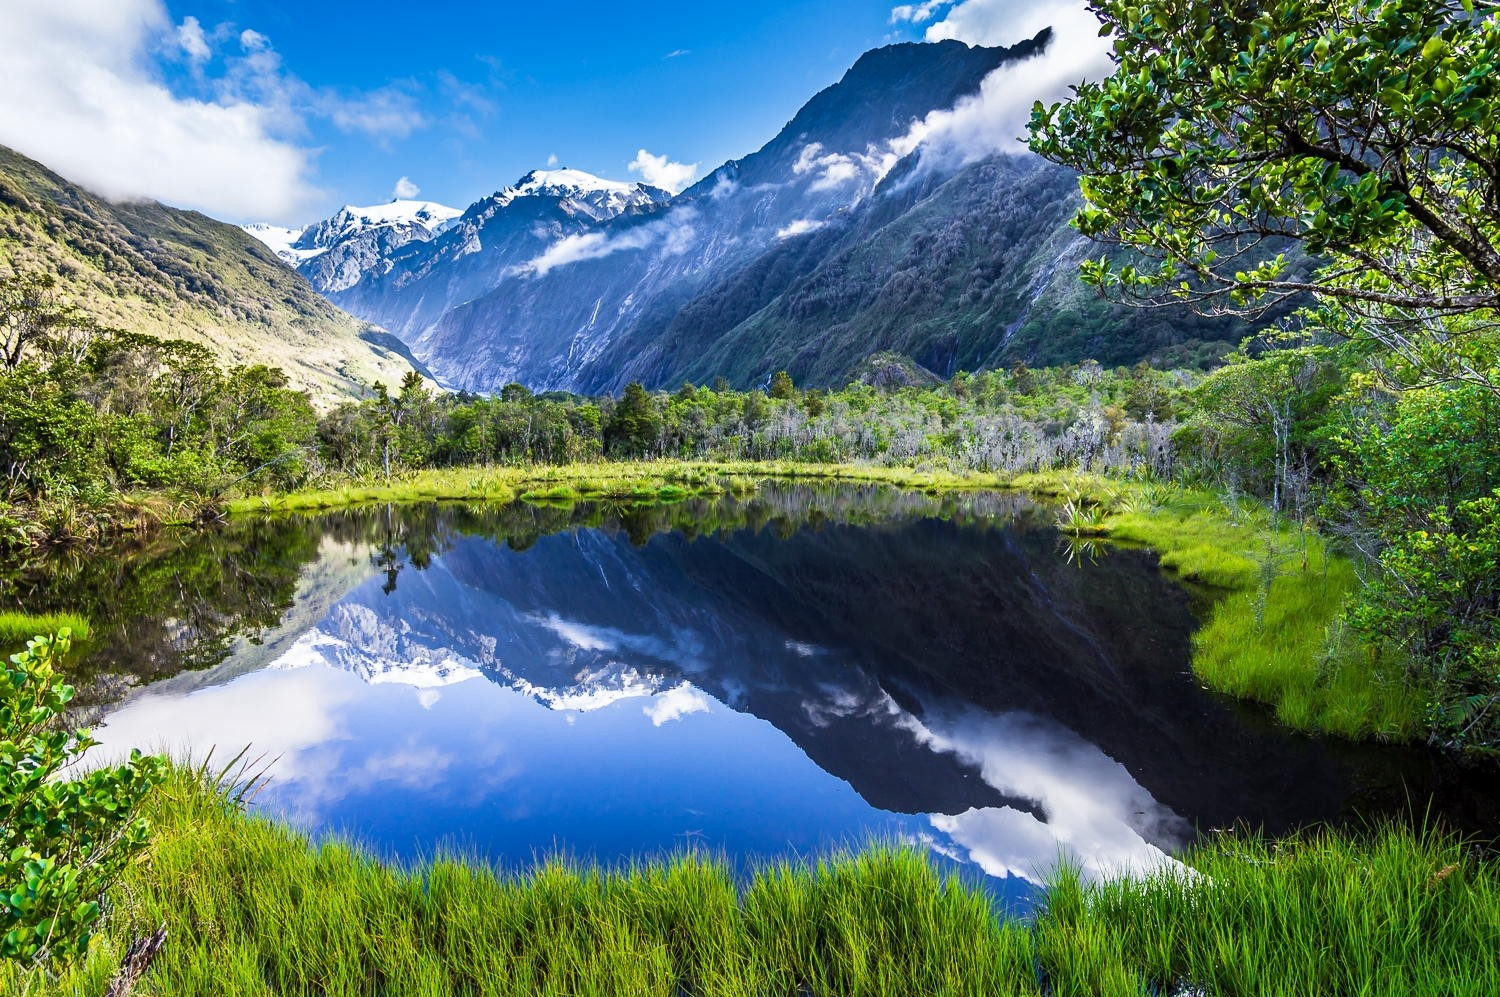 General 1500x997 nature landscape summer lake reflection mountains grass forest snowy peak clouds New Zealand